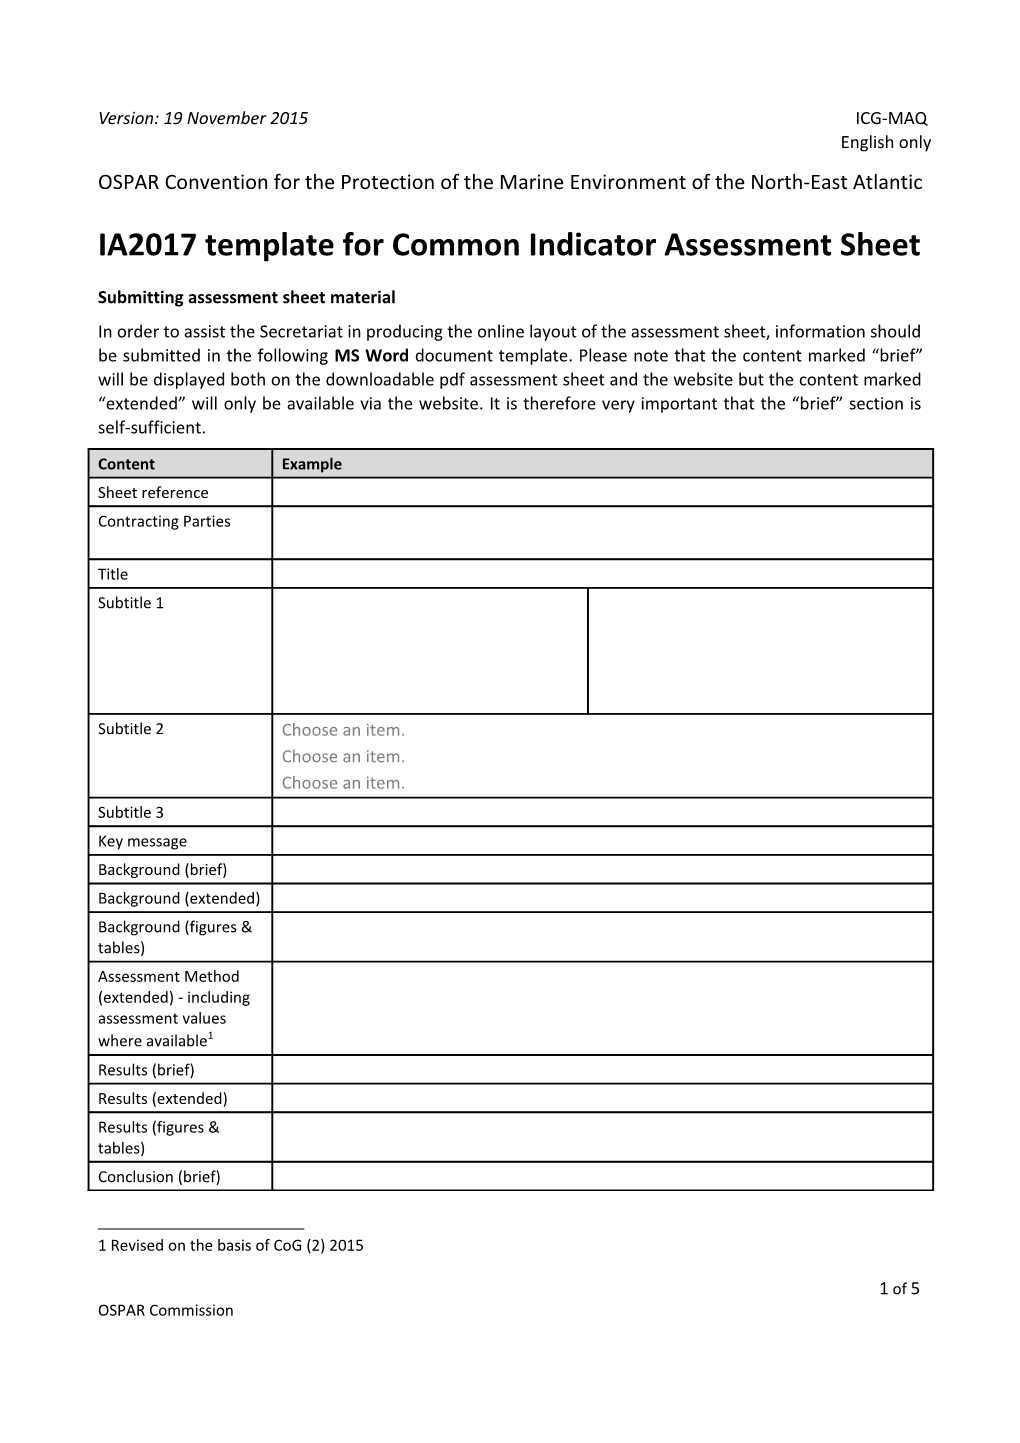 IA2017 Template for Common Indicator Assessment Sheet